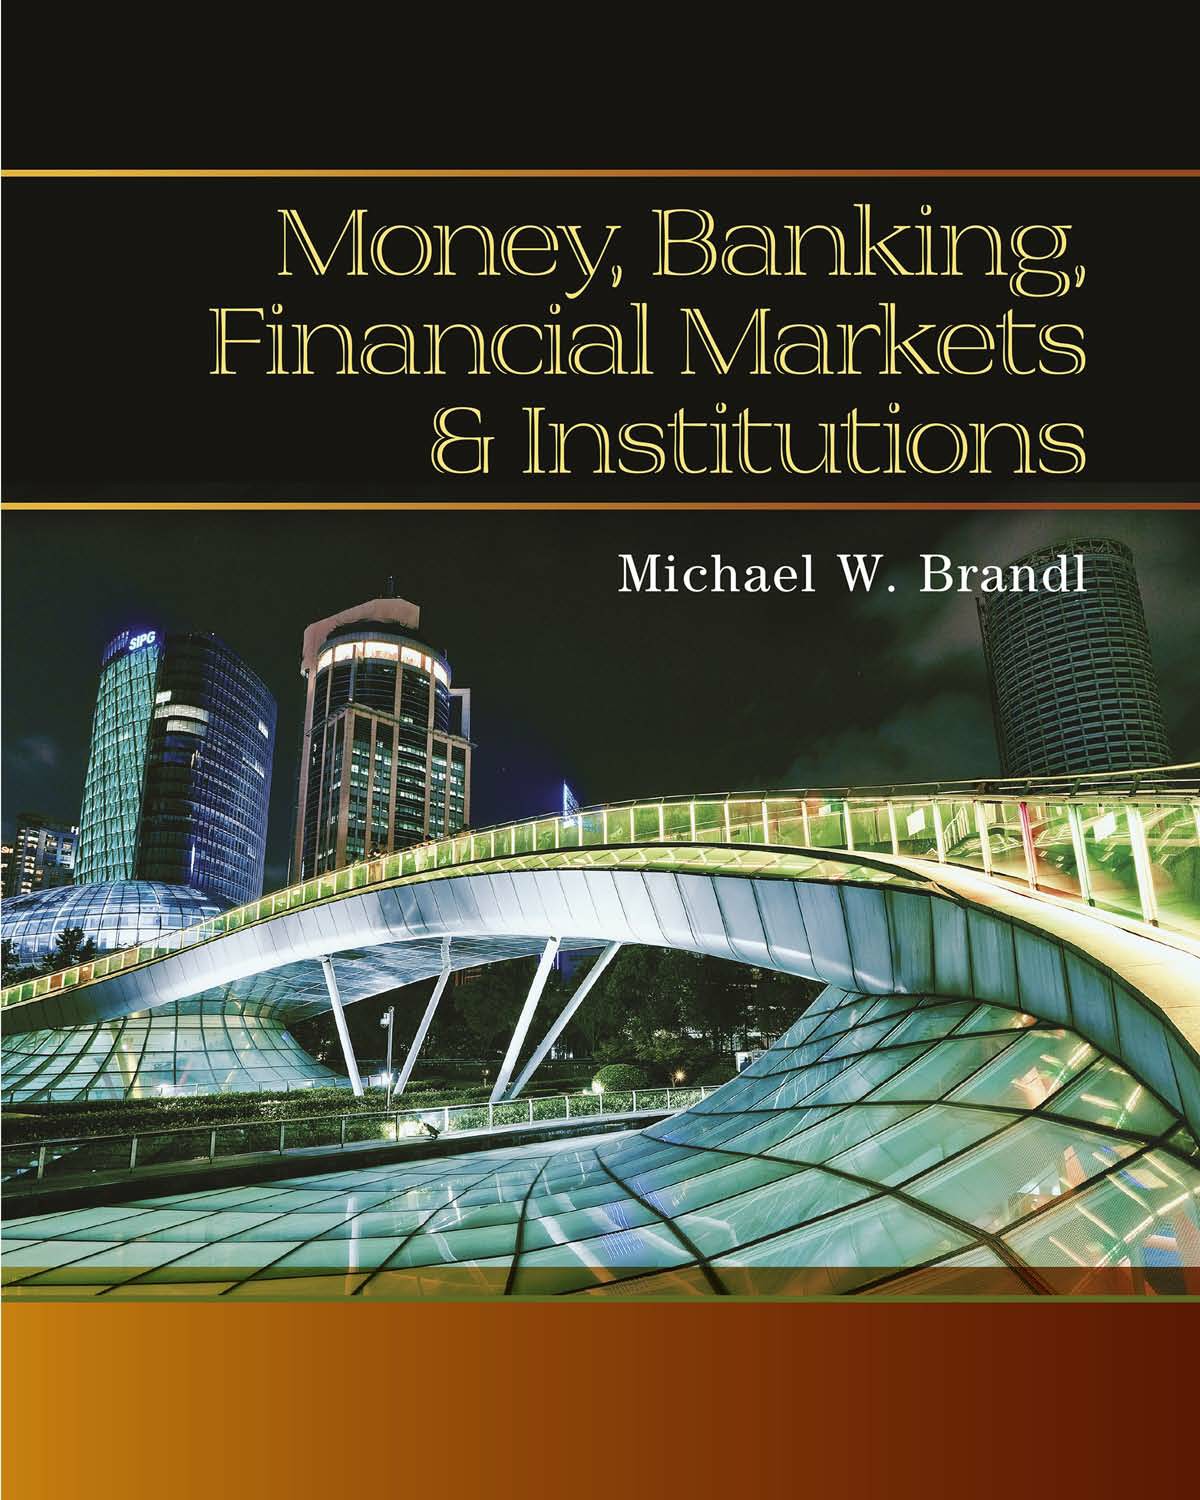 Money banking financial markets and institutions michael brandl pdf download crazy money deluxe free download